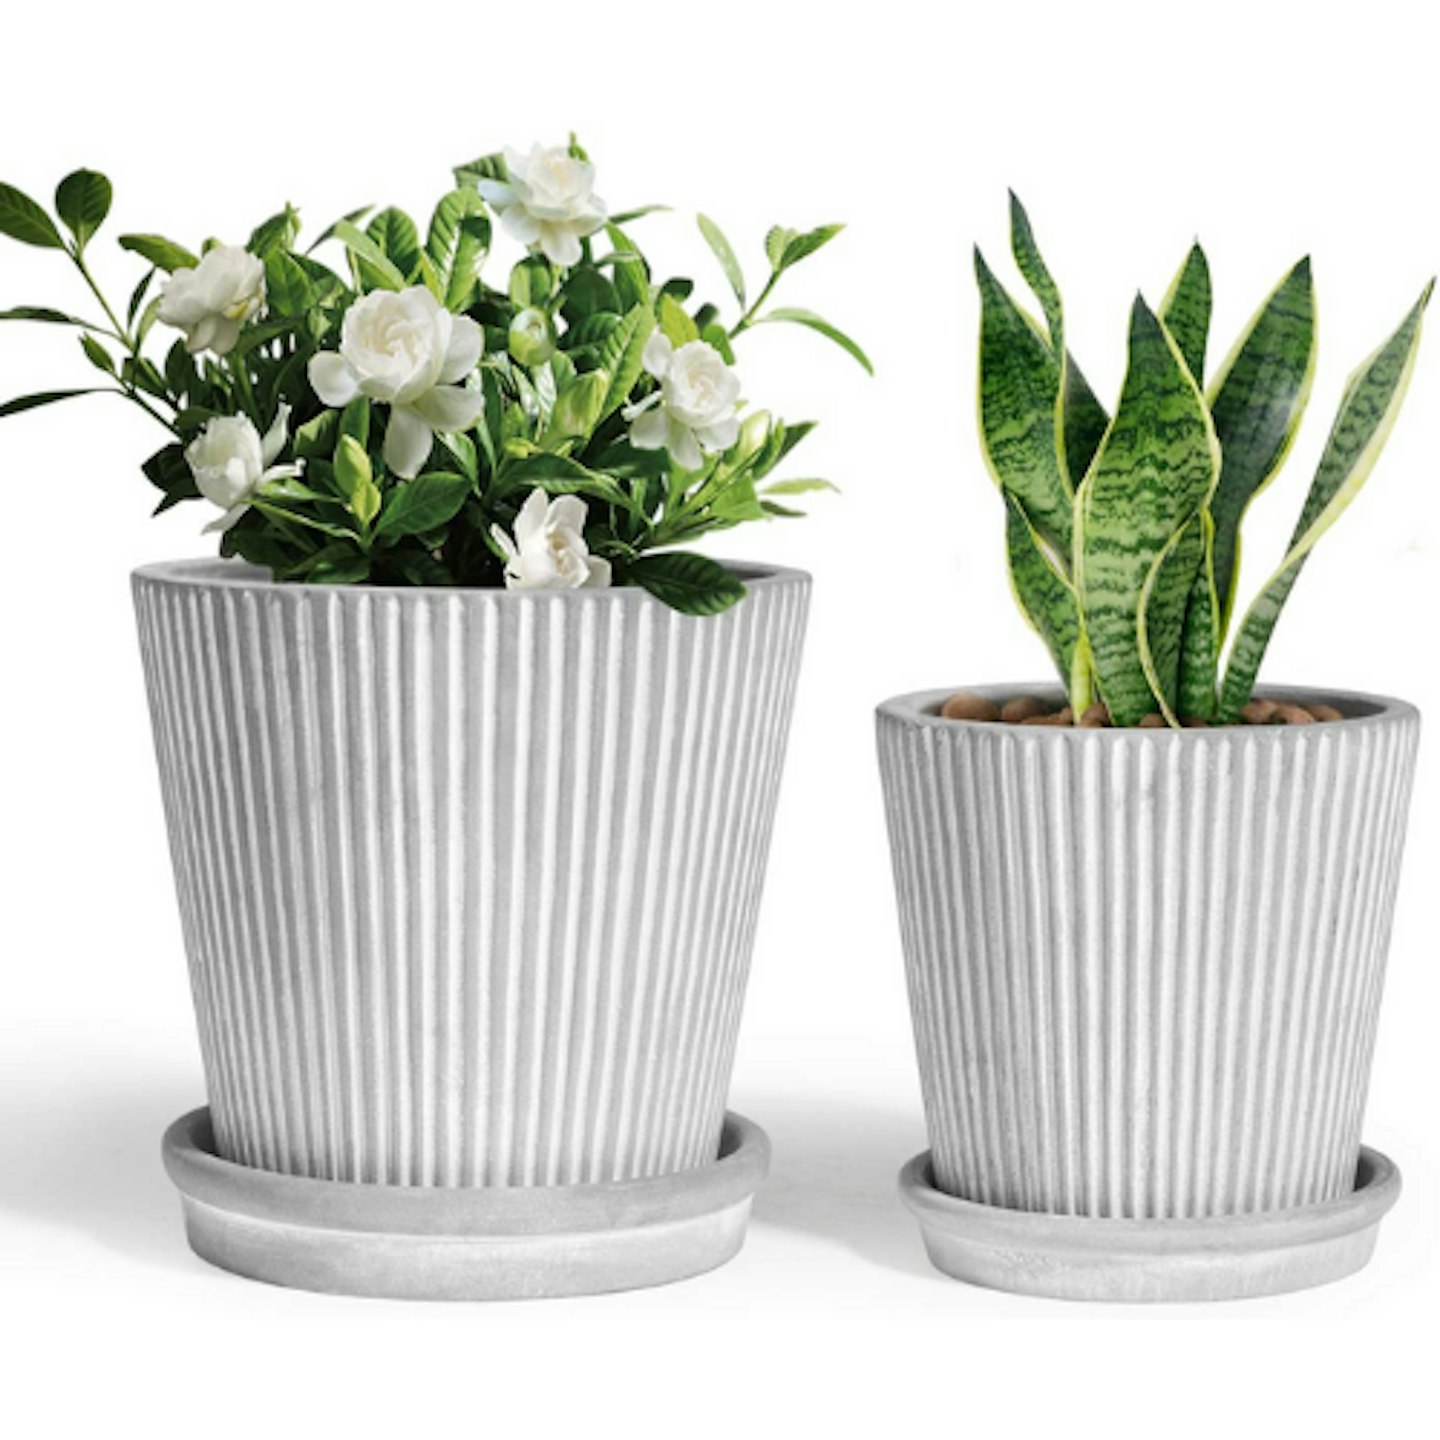 T4U Cement Plant Planter Pot with Saucer (Pack of 2)